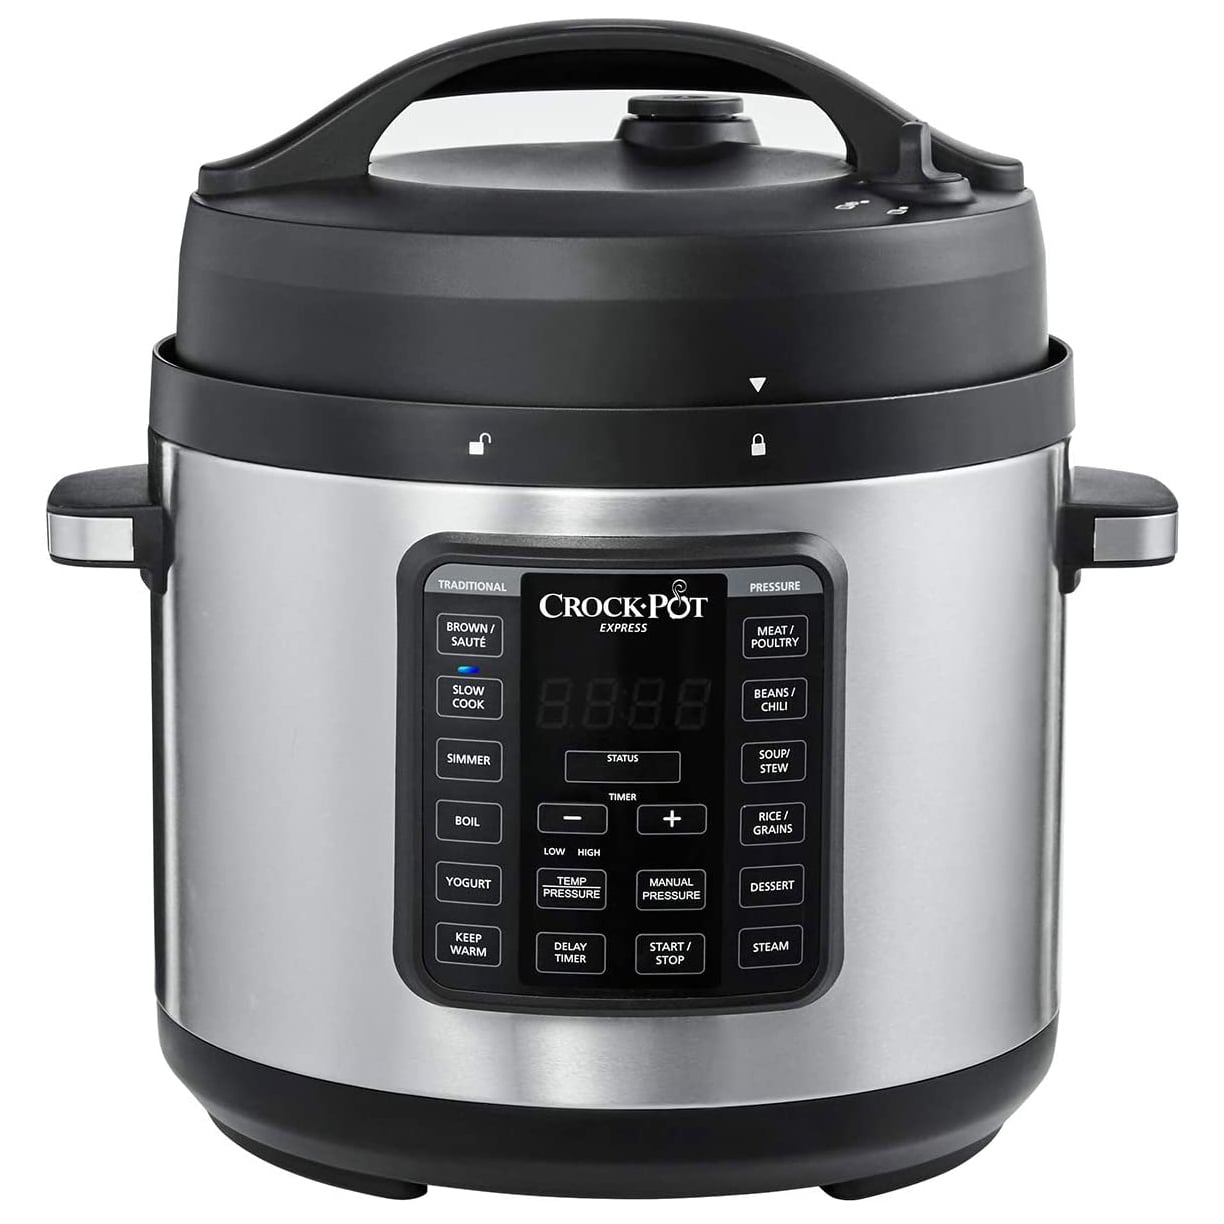 Crock-Pot Express 6-Qt Oval Max Pressure Cooker Stainless Steel Only $39.99  (Reg. $120) Shipped - Couponing with Rachel